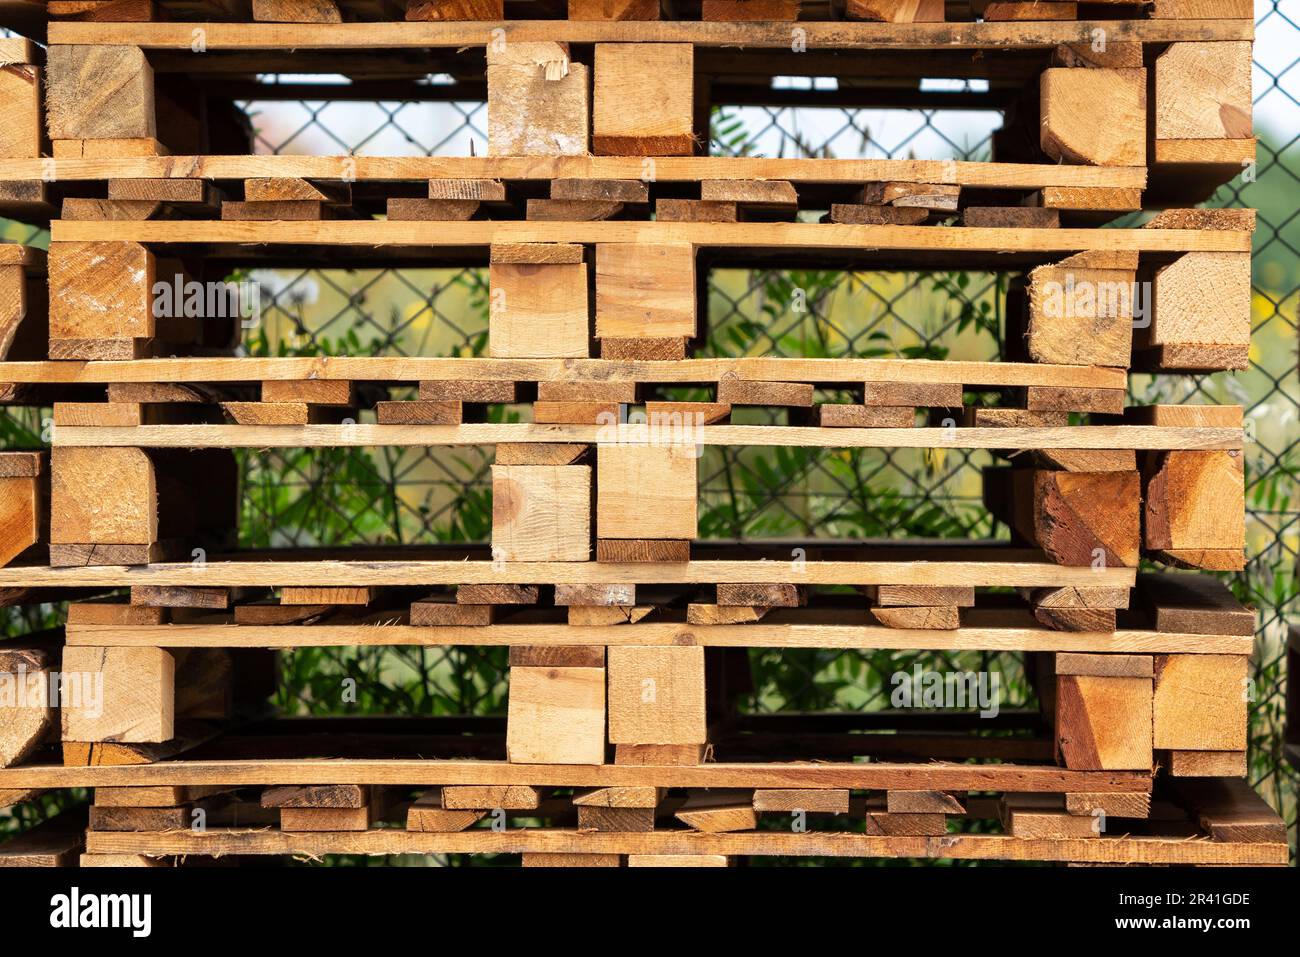 Transportation pallets made of wood. Stock Photo